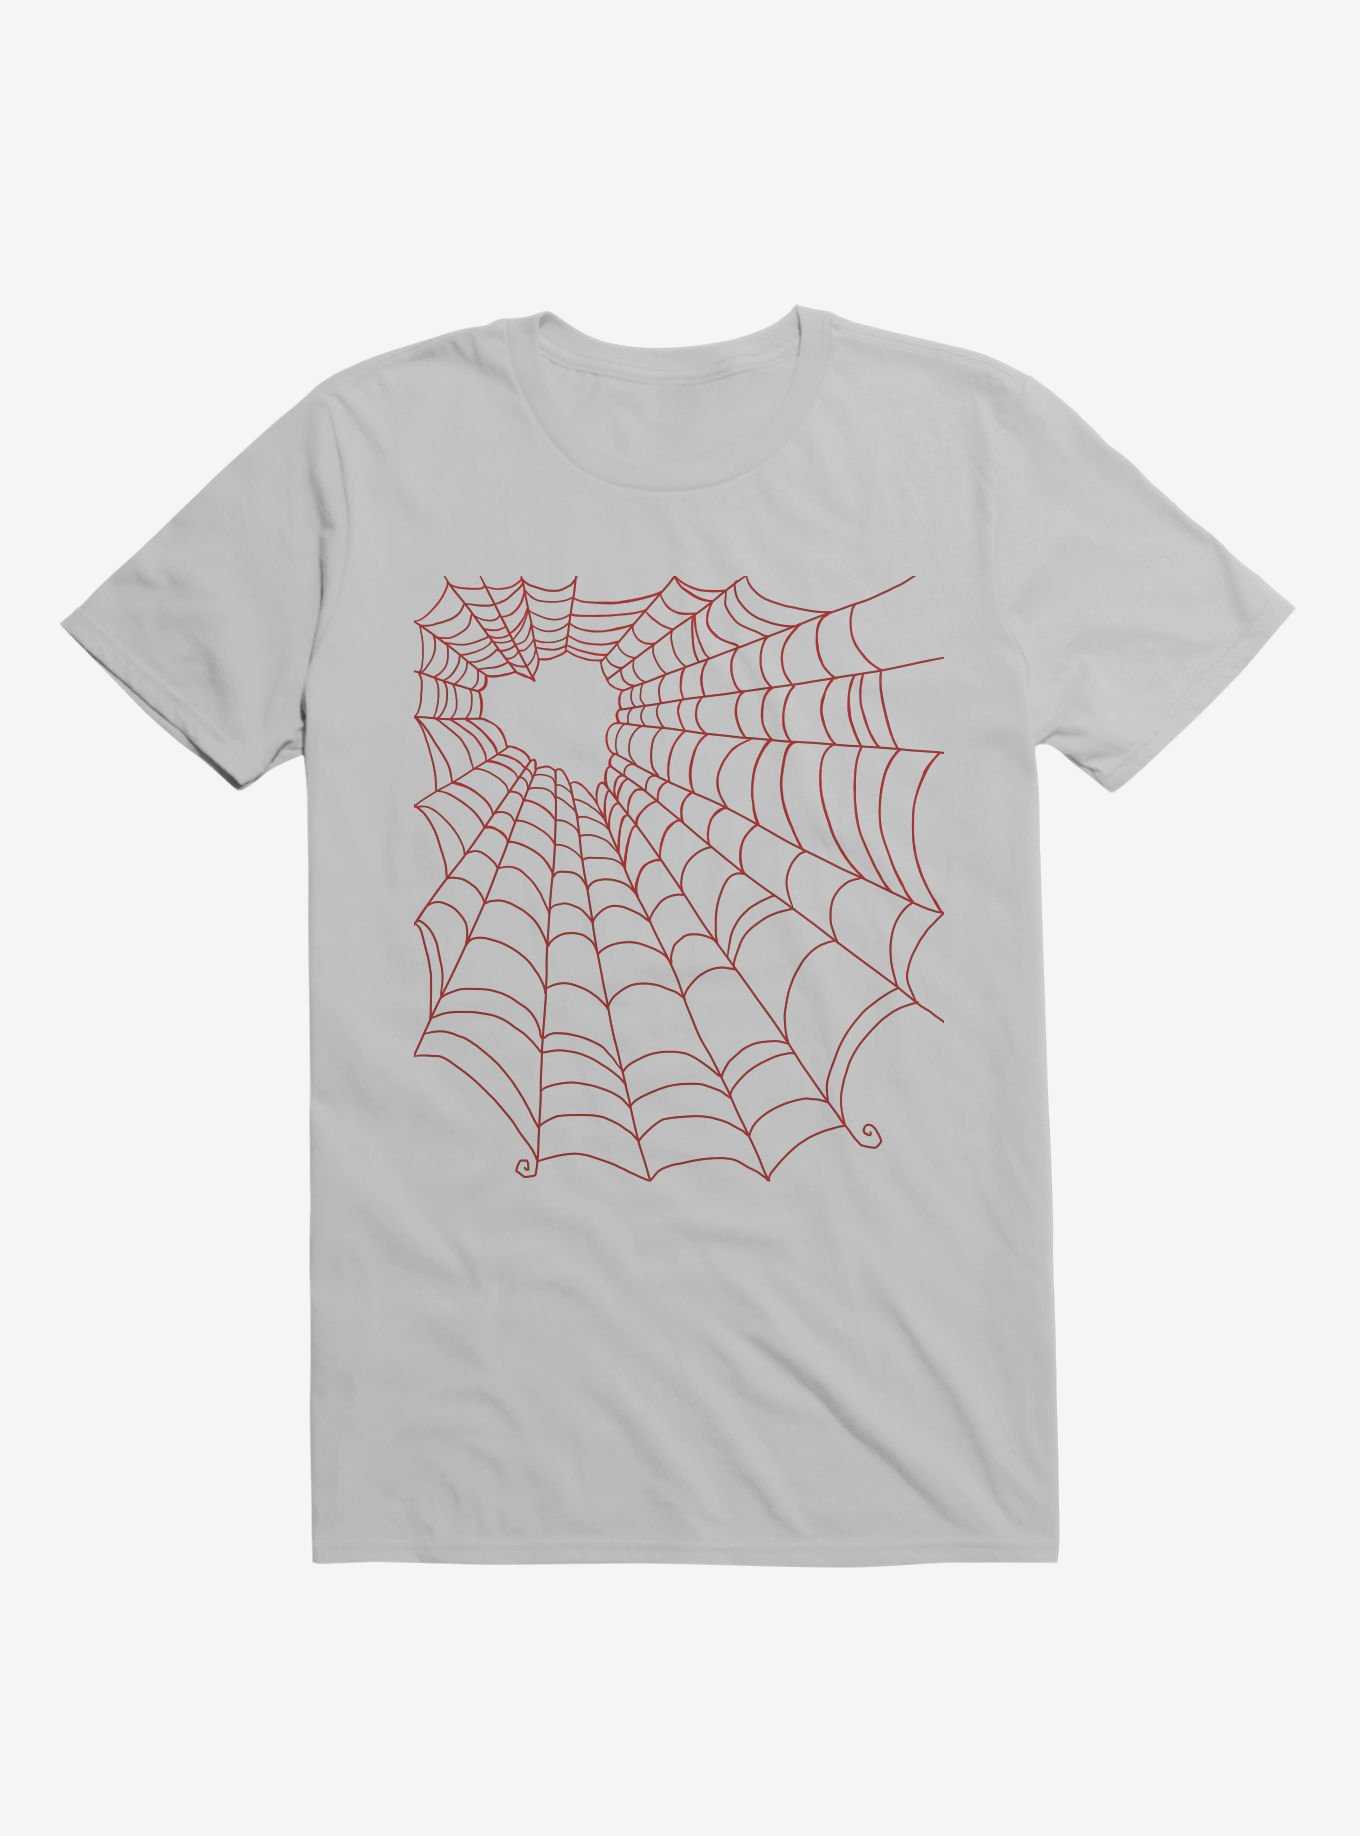 Caught You In My Red Hearted Web Ice Grey T-Shirt, , hi-res